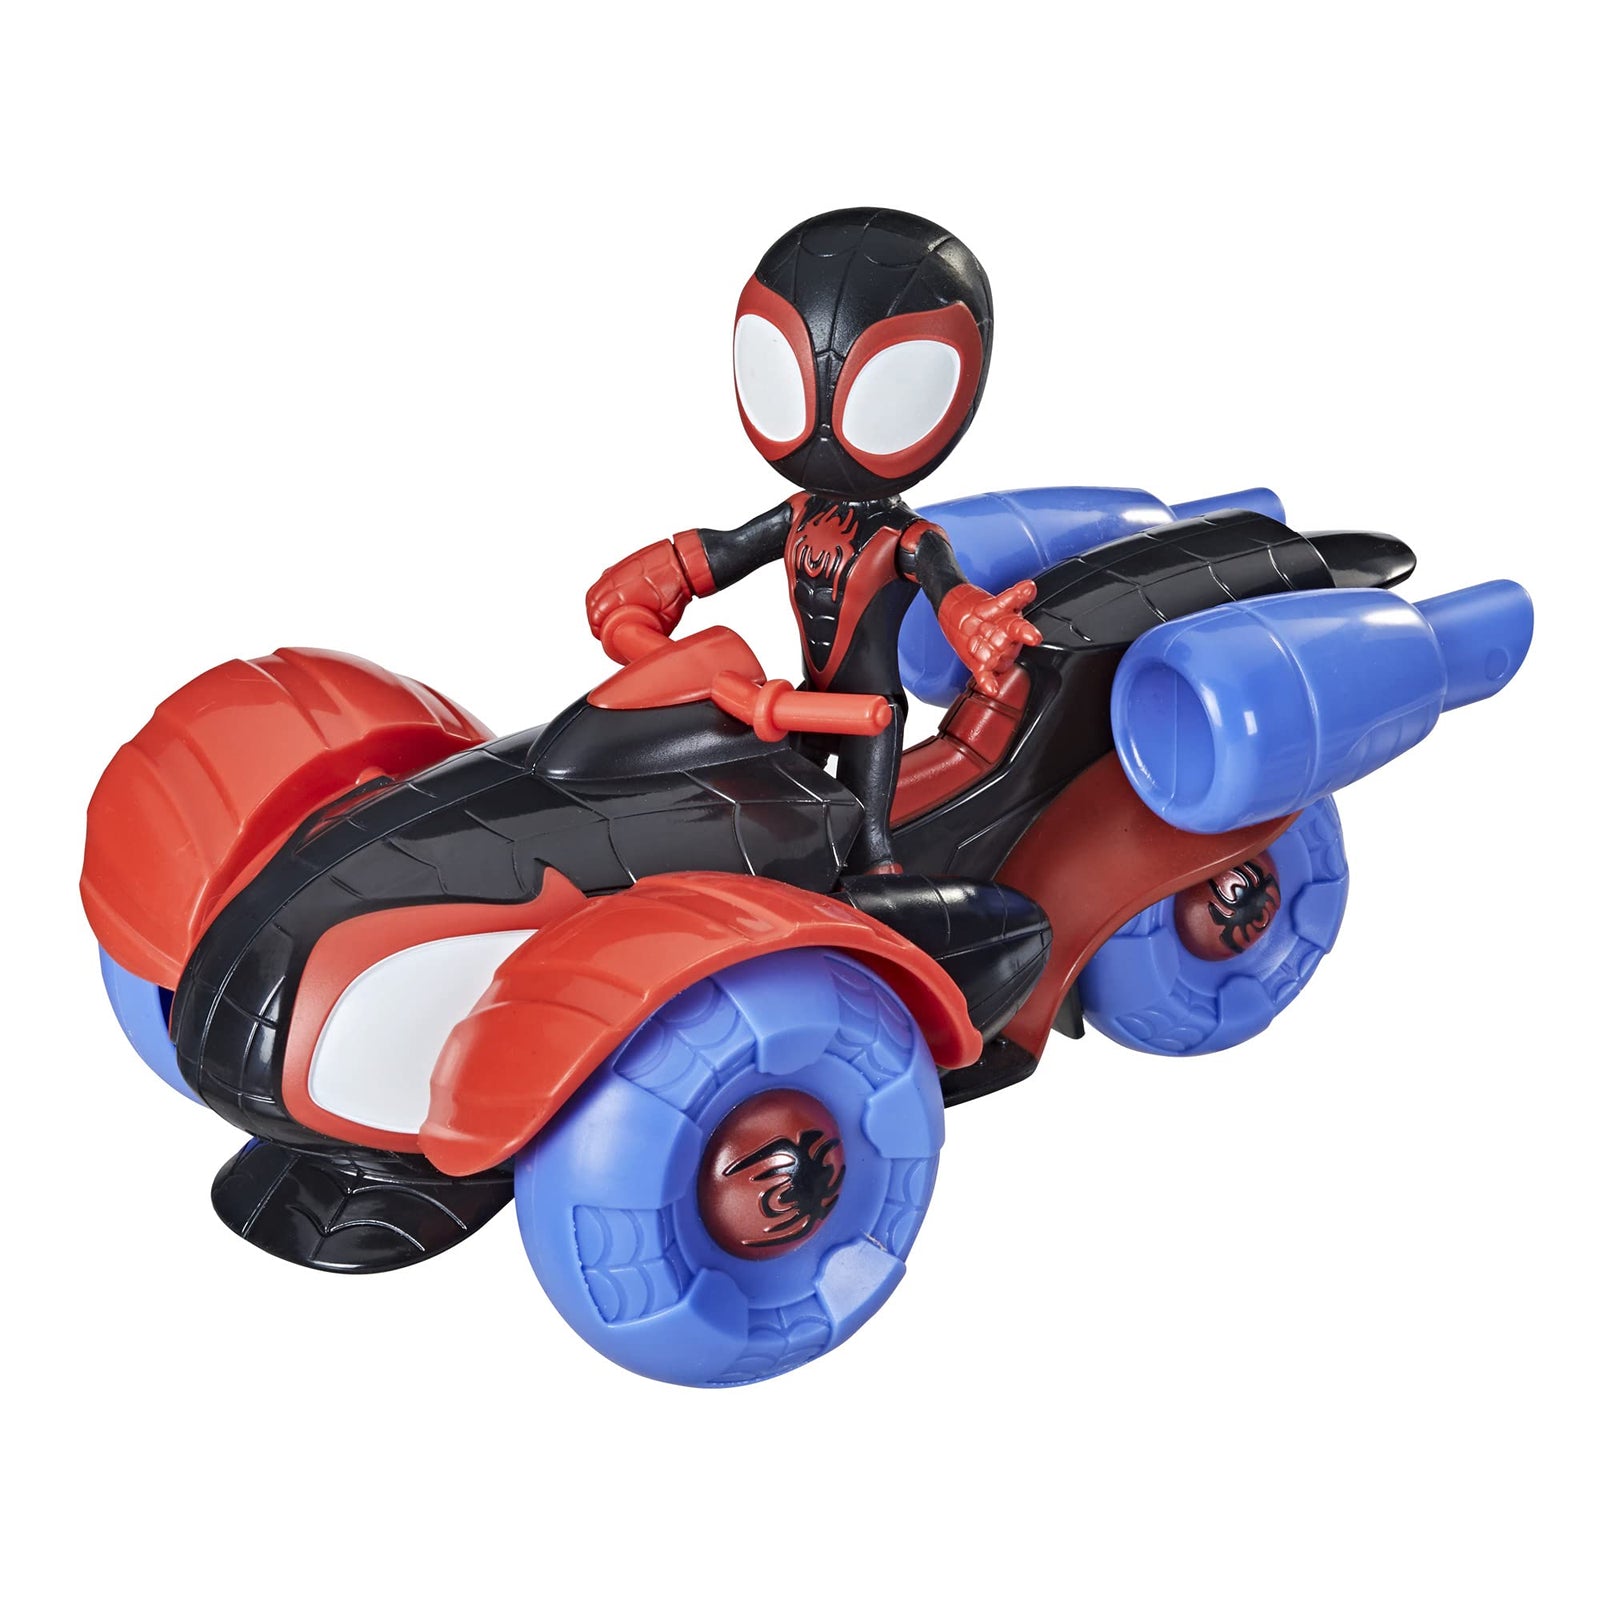 Marvel Spidey and His Amazing Friends Change 'N Go Techno-Racer and 4-Inch Miles Morales: Spider-Man Action Figure, 2 in 1 Vehicle, for Kids Ages 3 and Up, Frustration Free Packaging